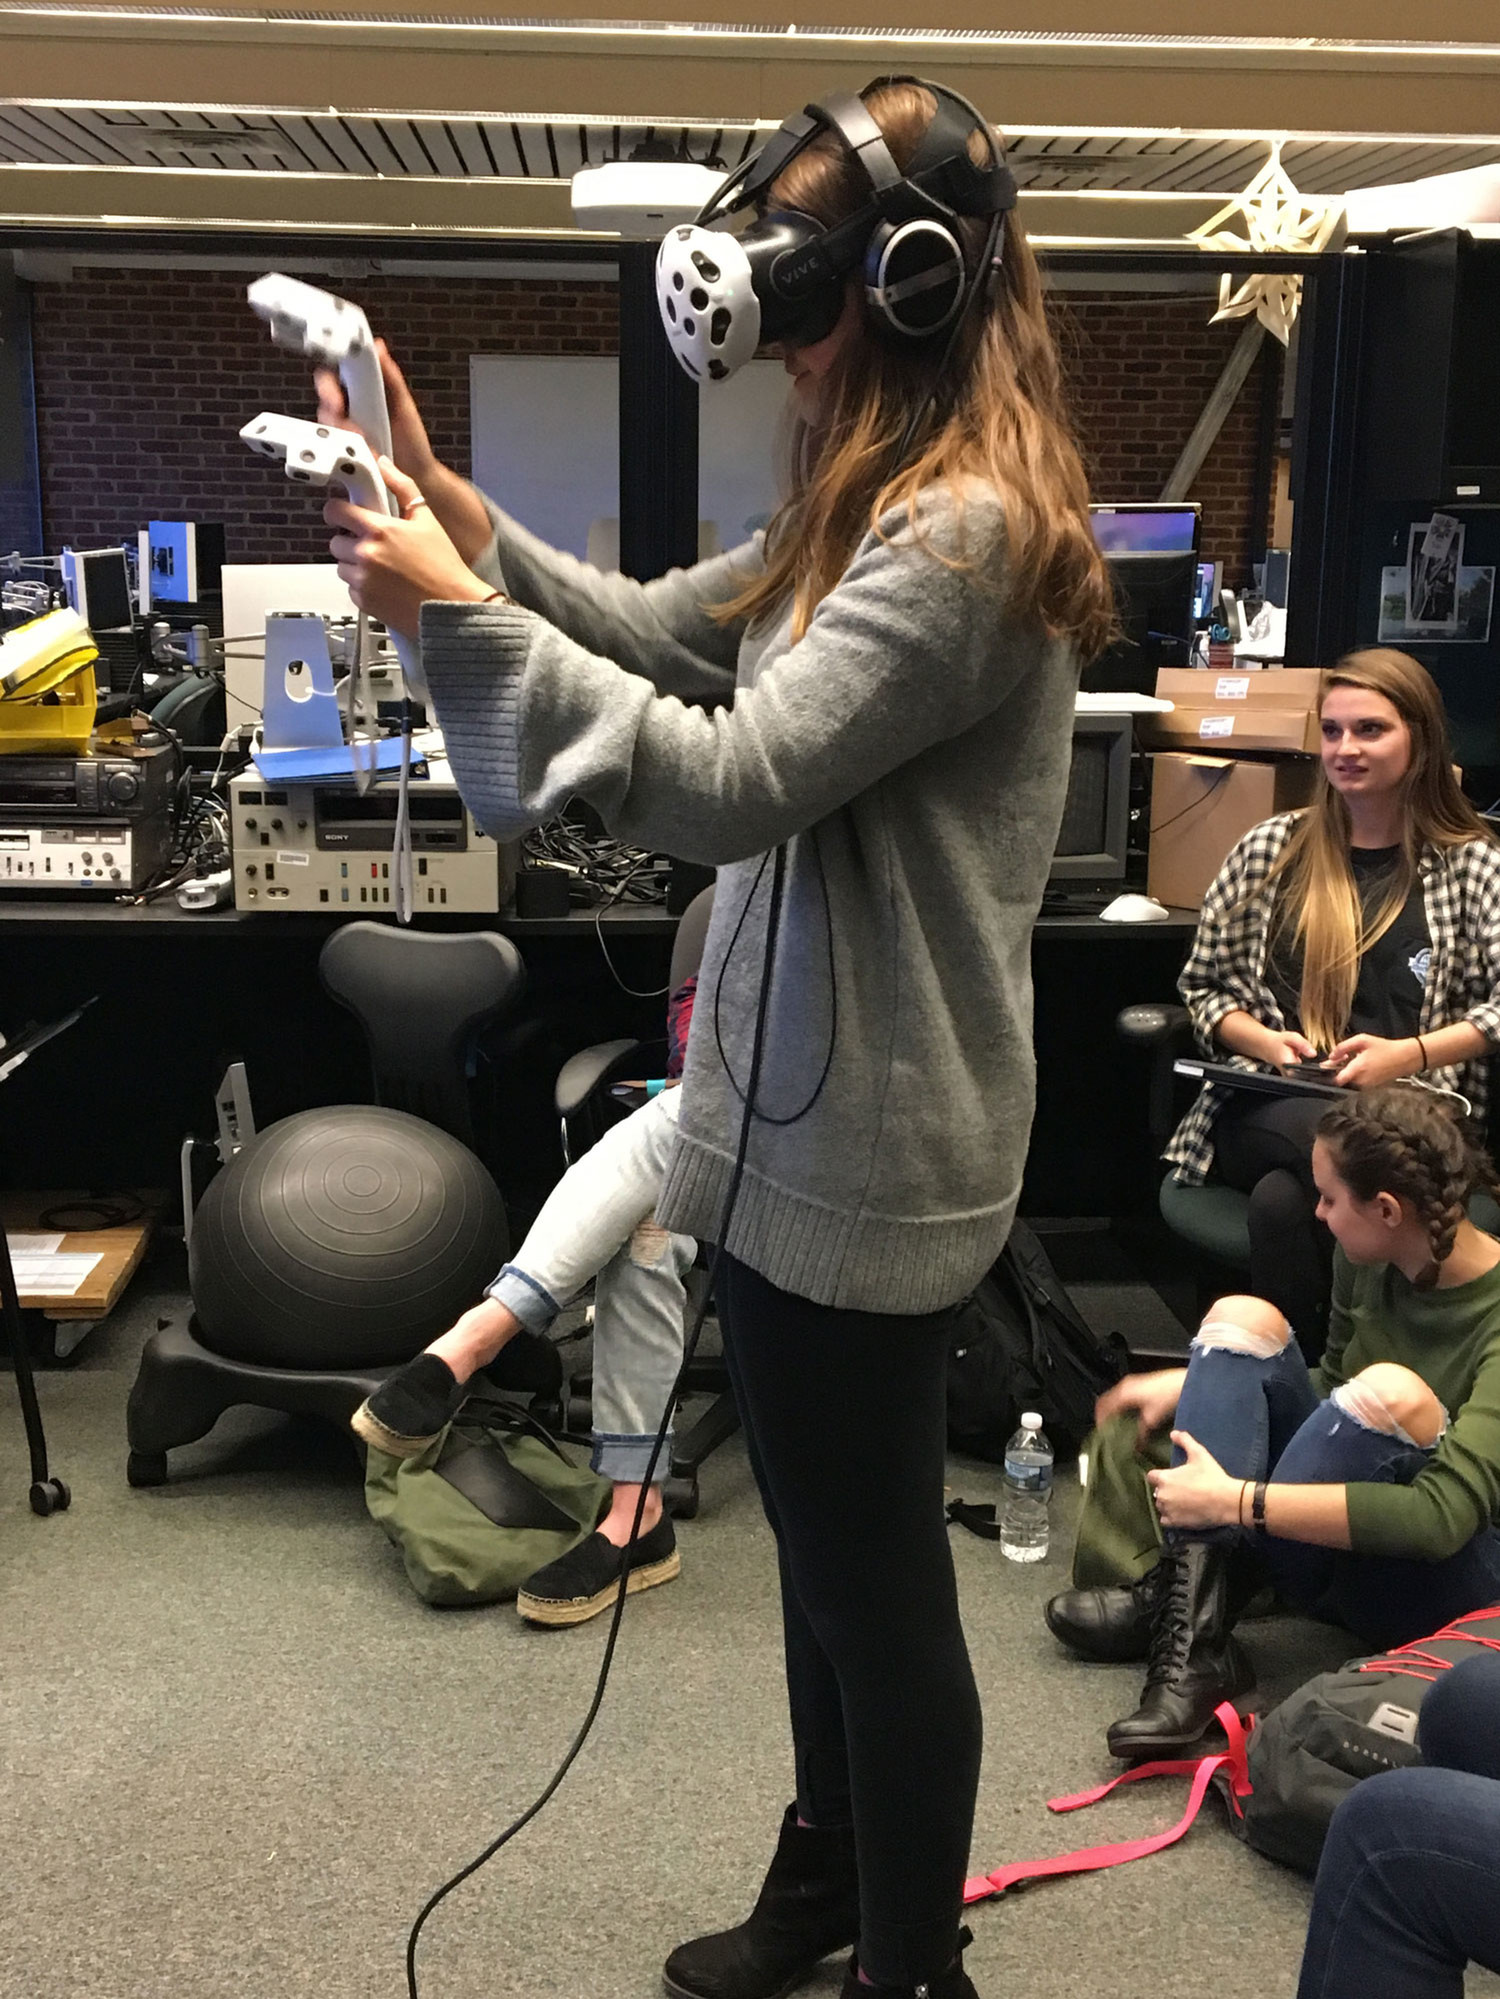 Archaeology student using virtual reality glasses